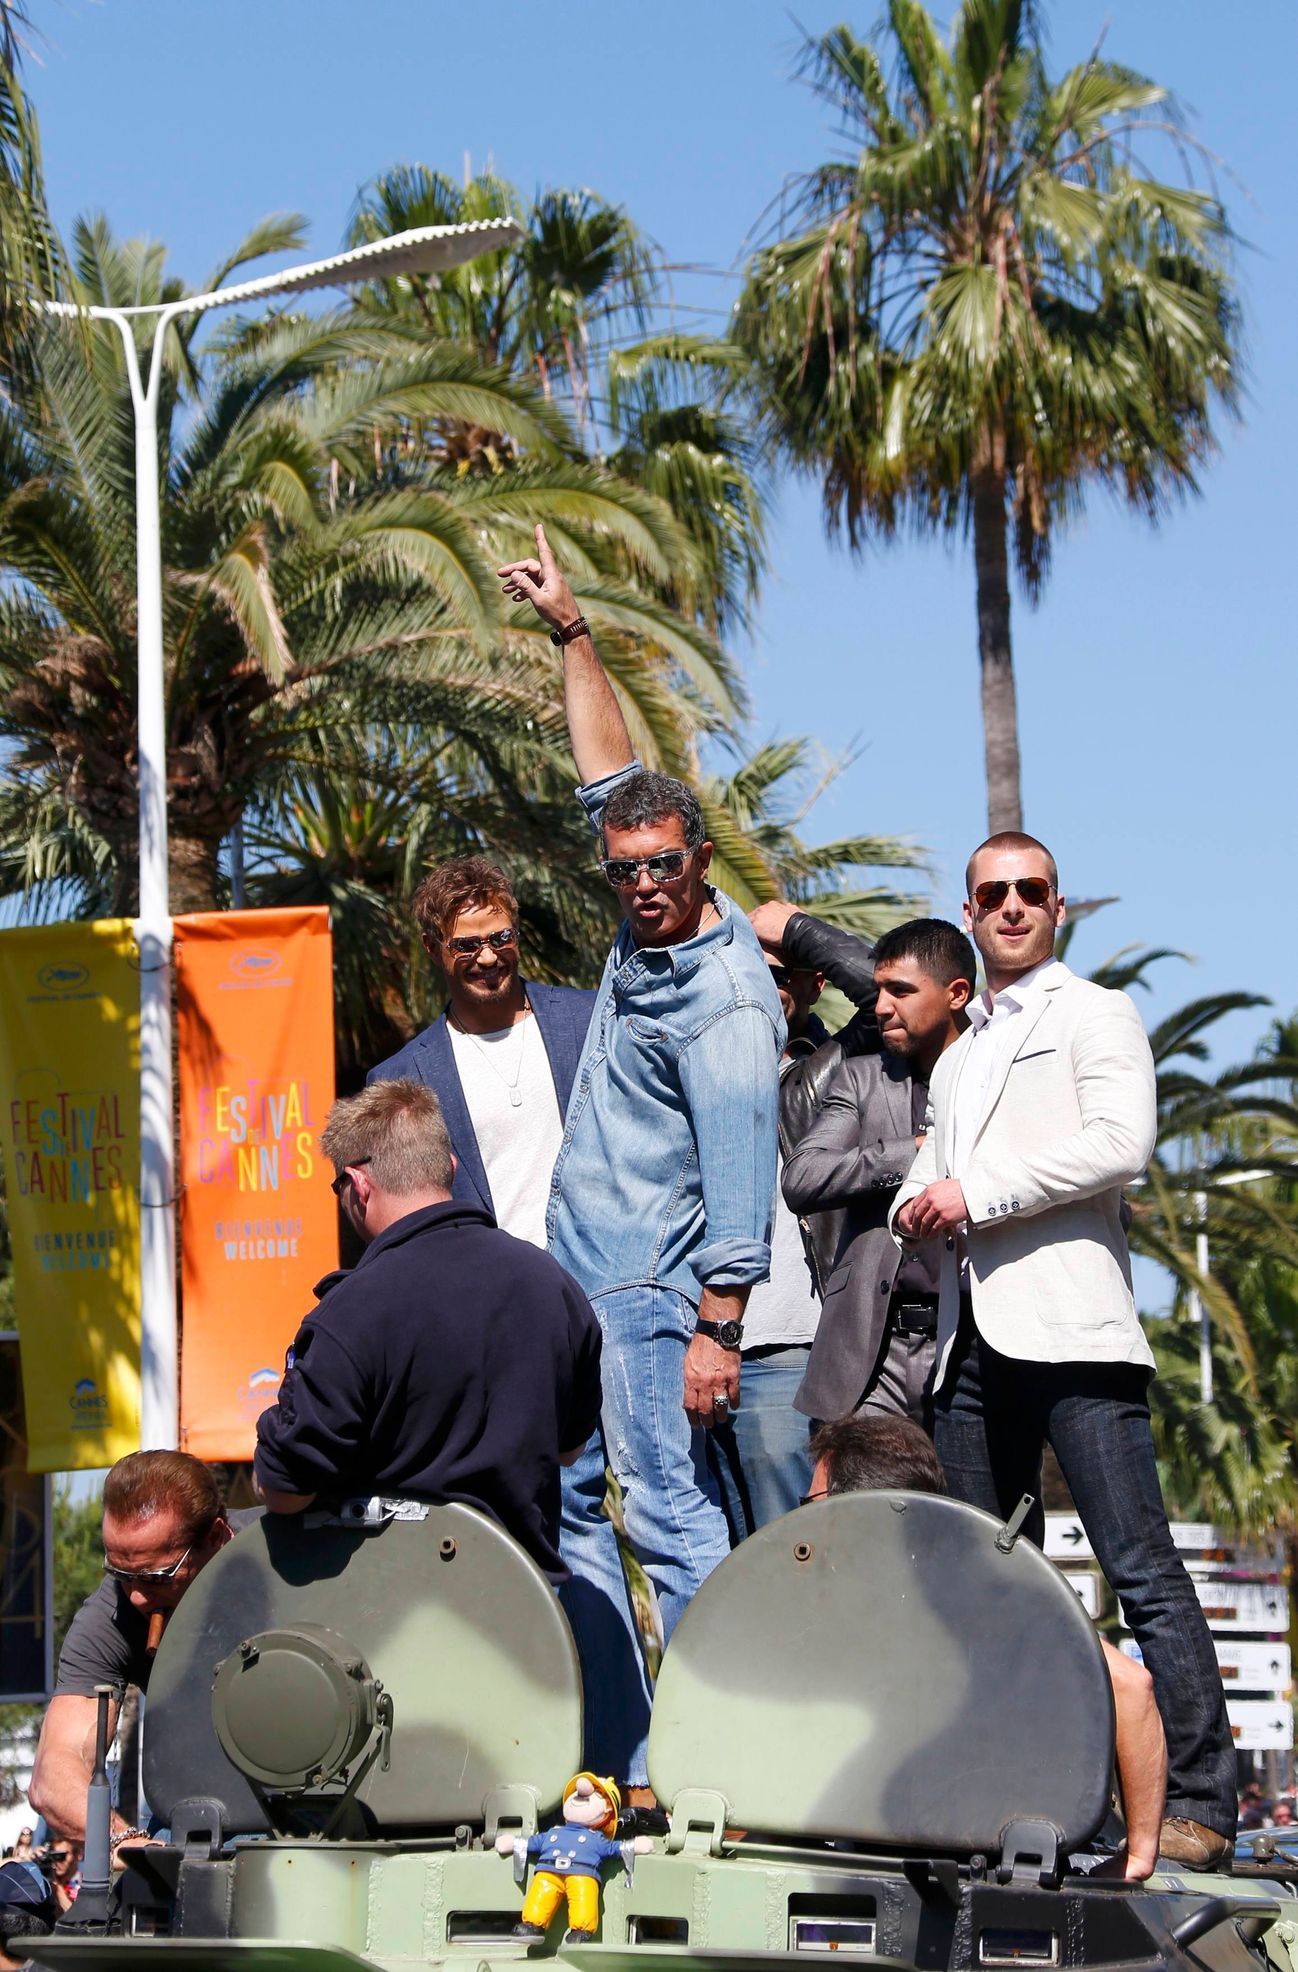 Cast members  Kellan Lutz, Antonio Banderas, Victor Ortiz and Glen Powell pose on a tank on the Croisette to promote the film &quot;The Expendables 3&quot; during the 67th Cannes Film Festival in Cann